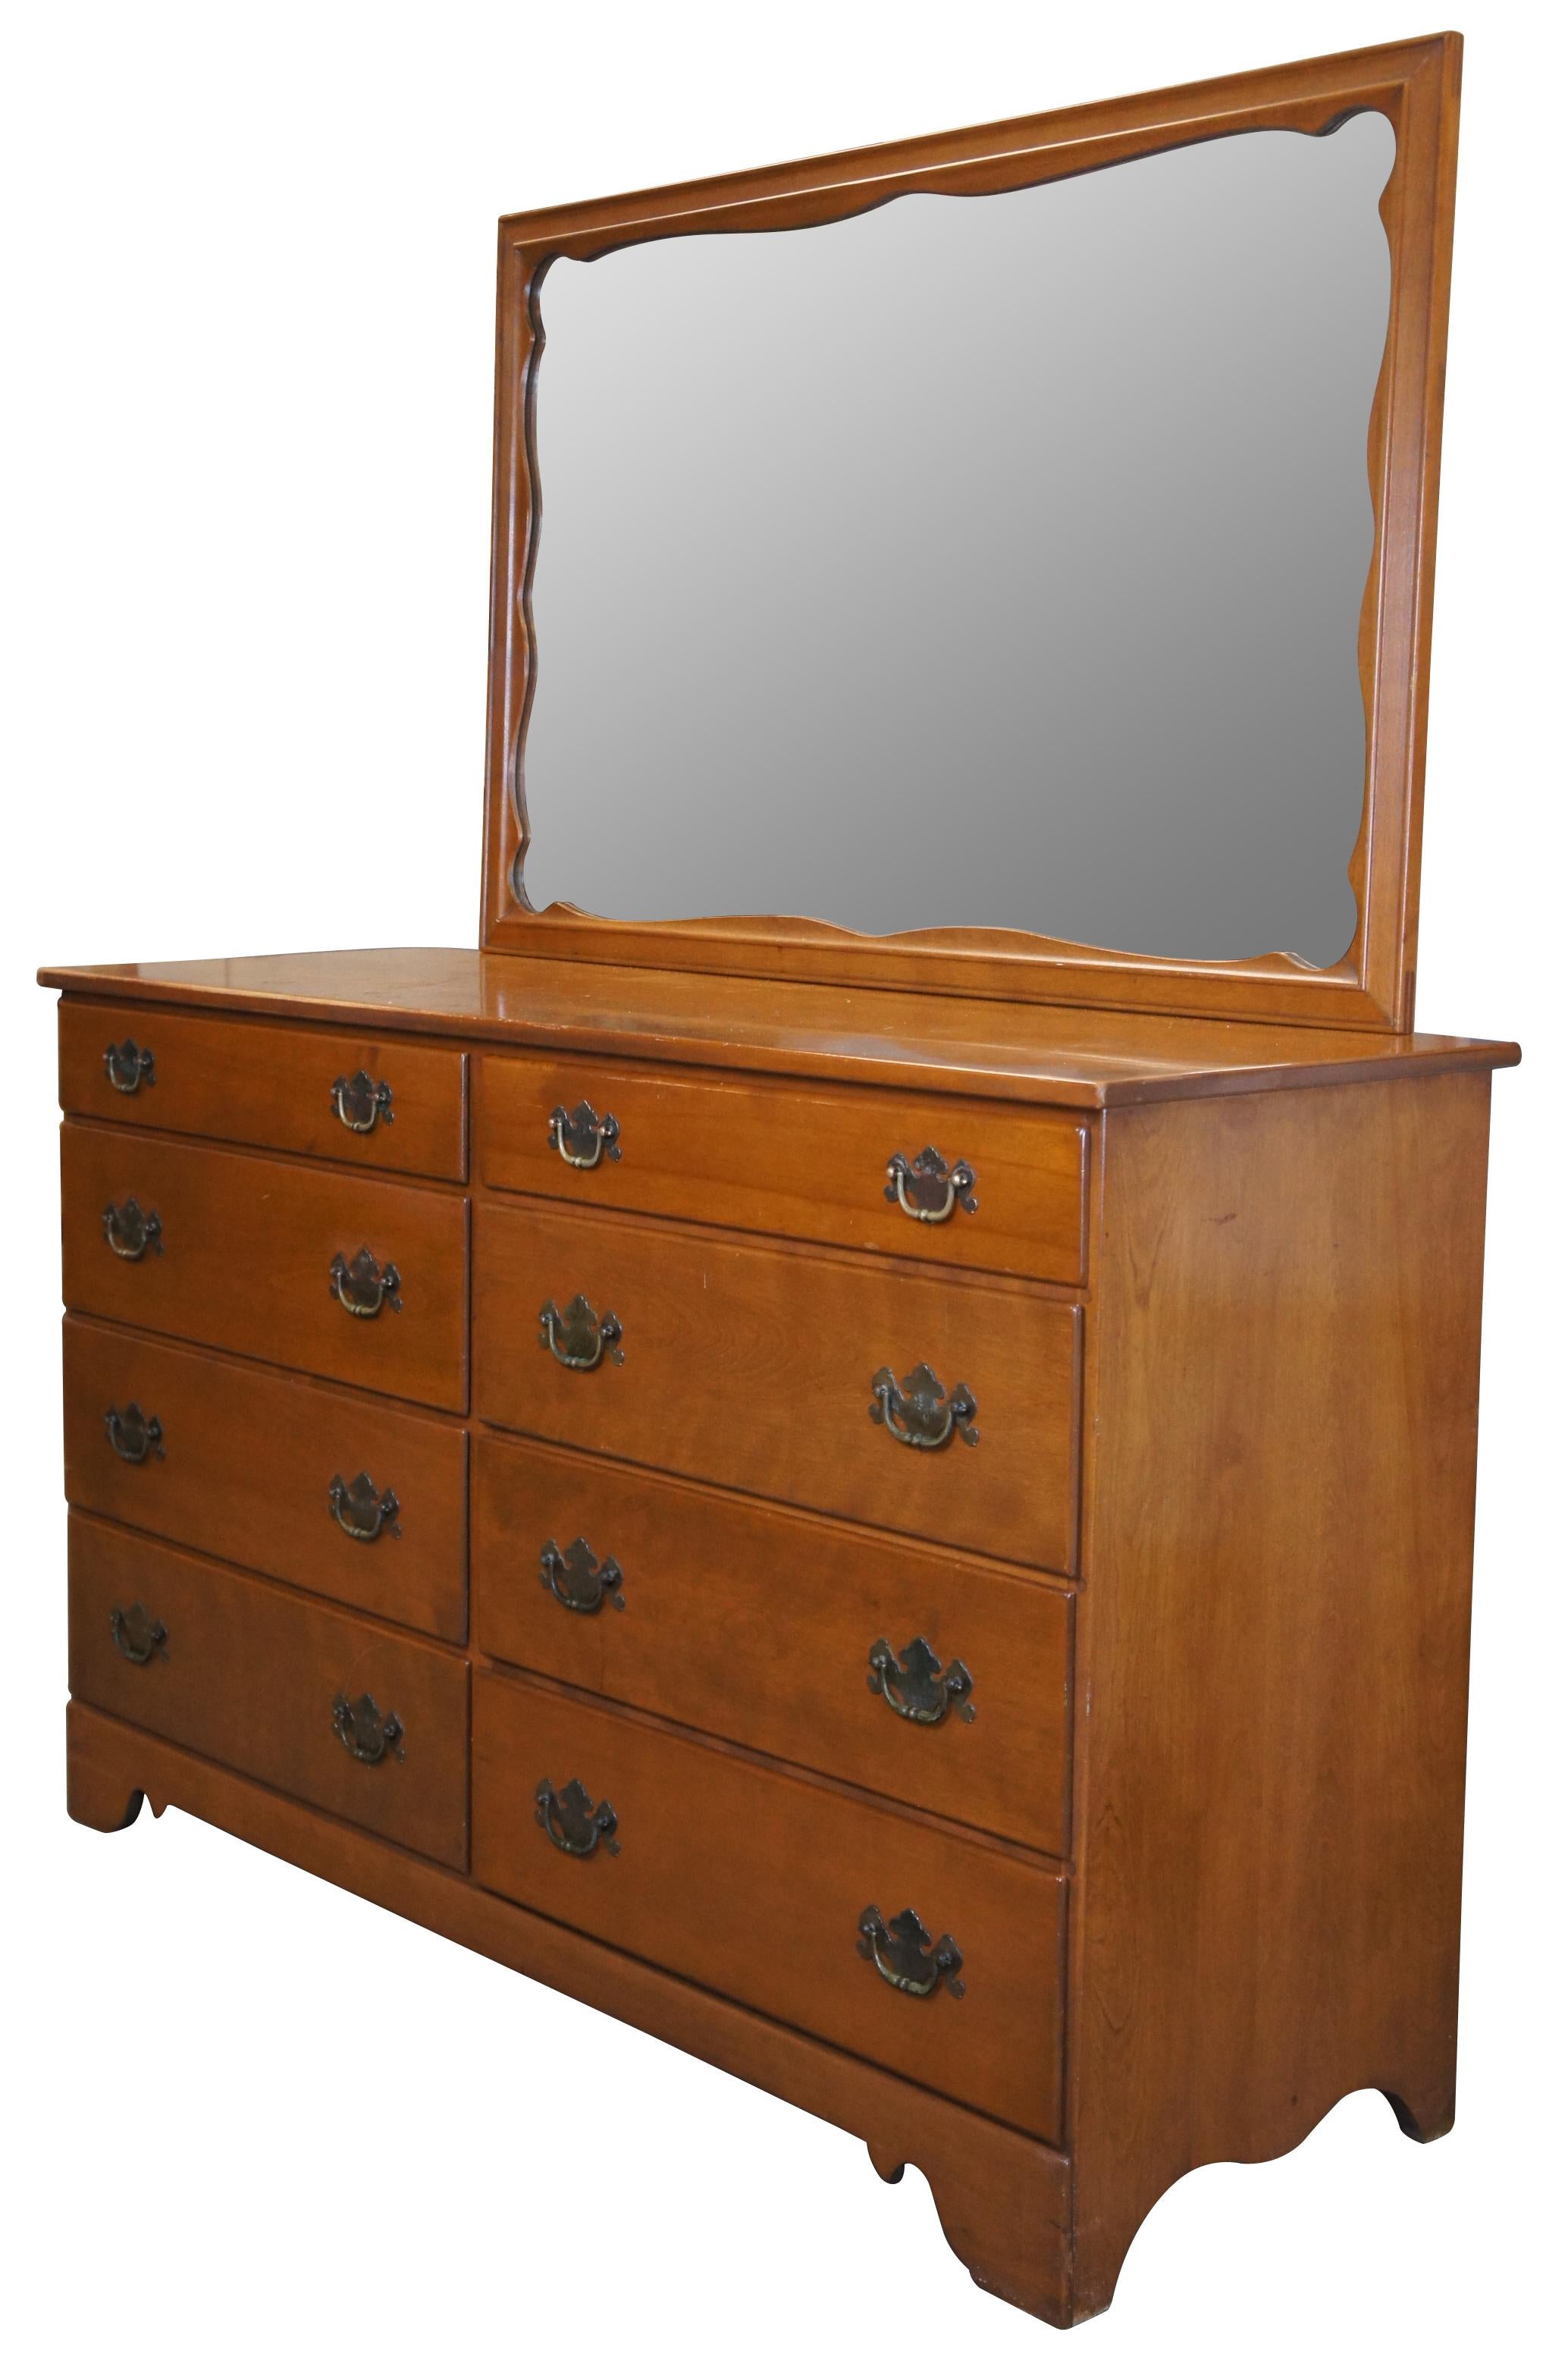 Vintage Ethan Allen Baumritter Heirloom Nutmeg dresser with looking glass. Made of maple featuring rectangular form with serpentine skirt, large mirror and eight drawers with colonial brass pulls.

Measures: 19.5